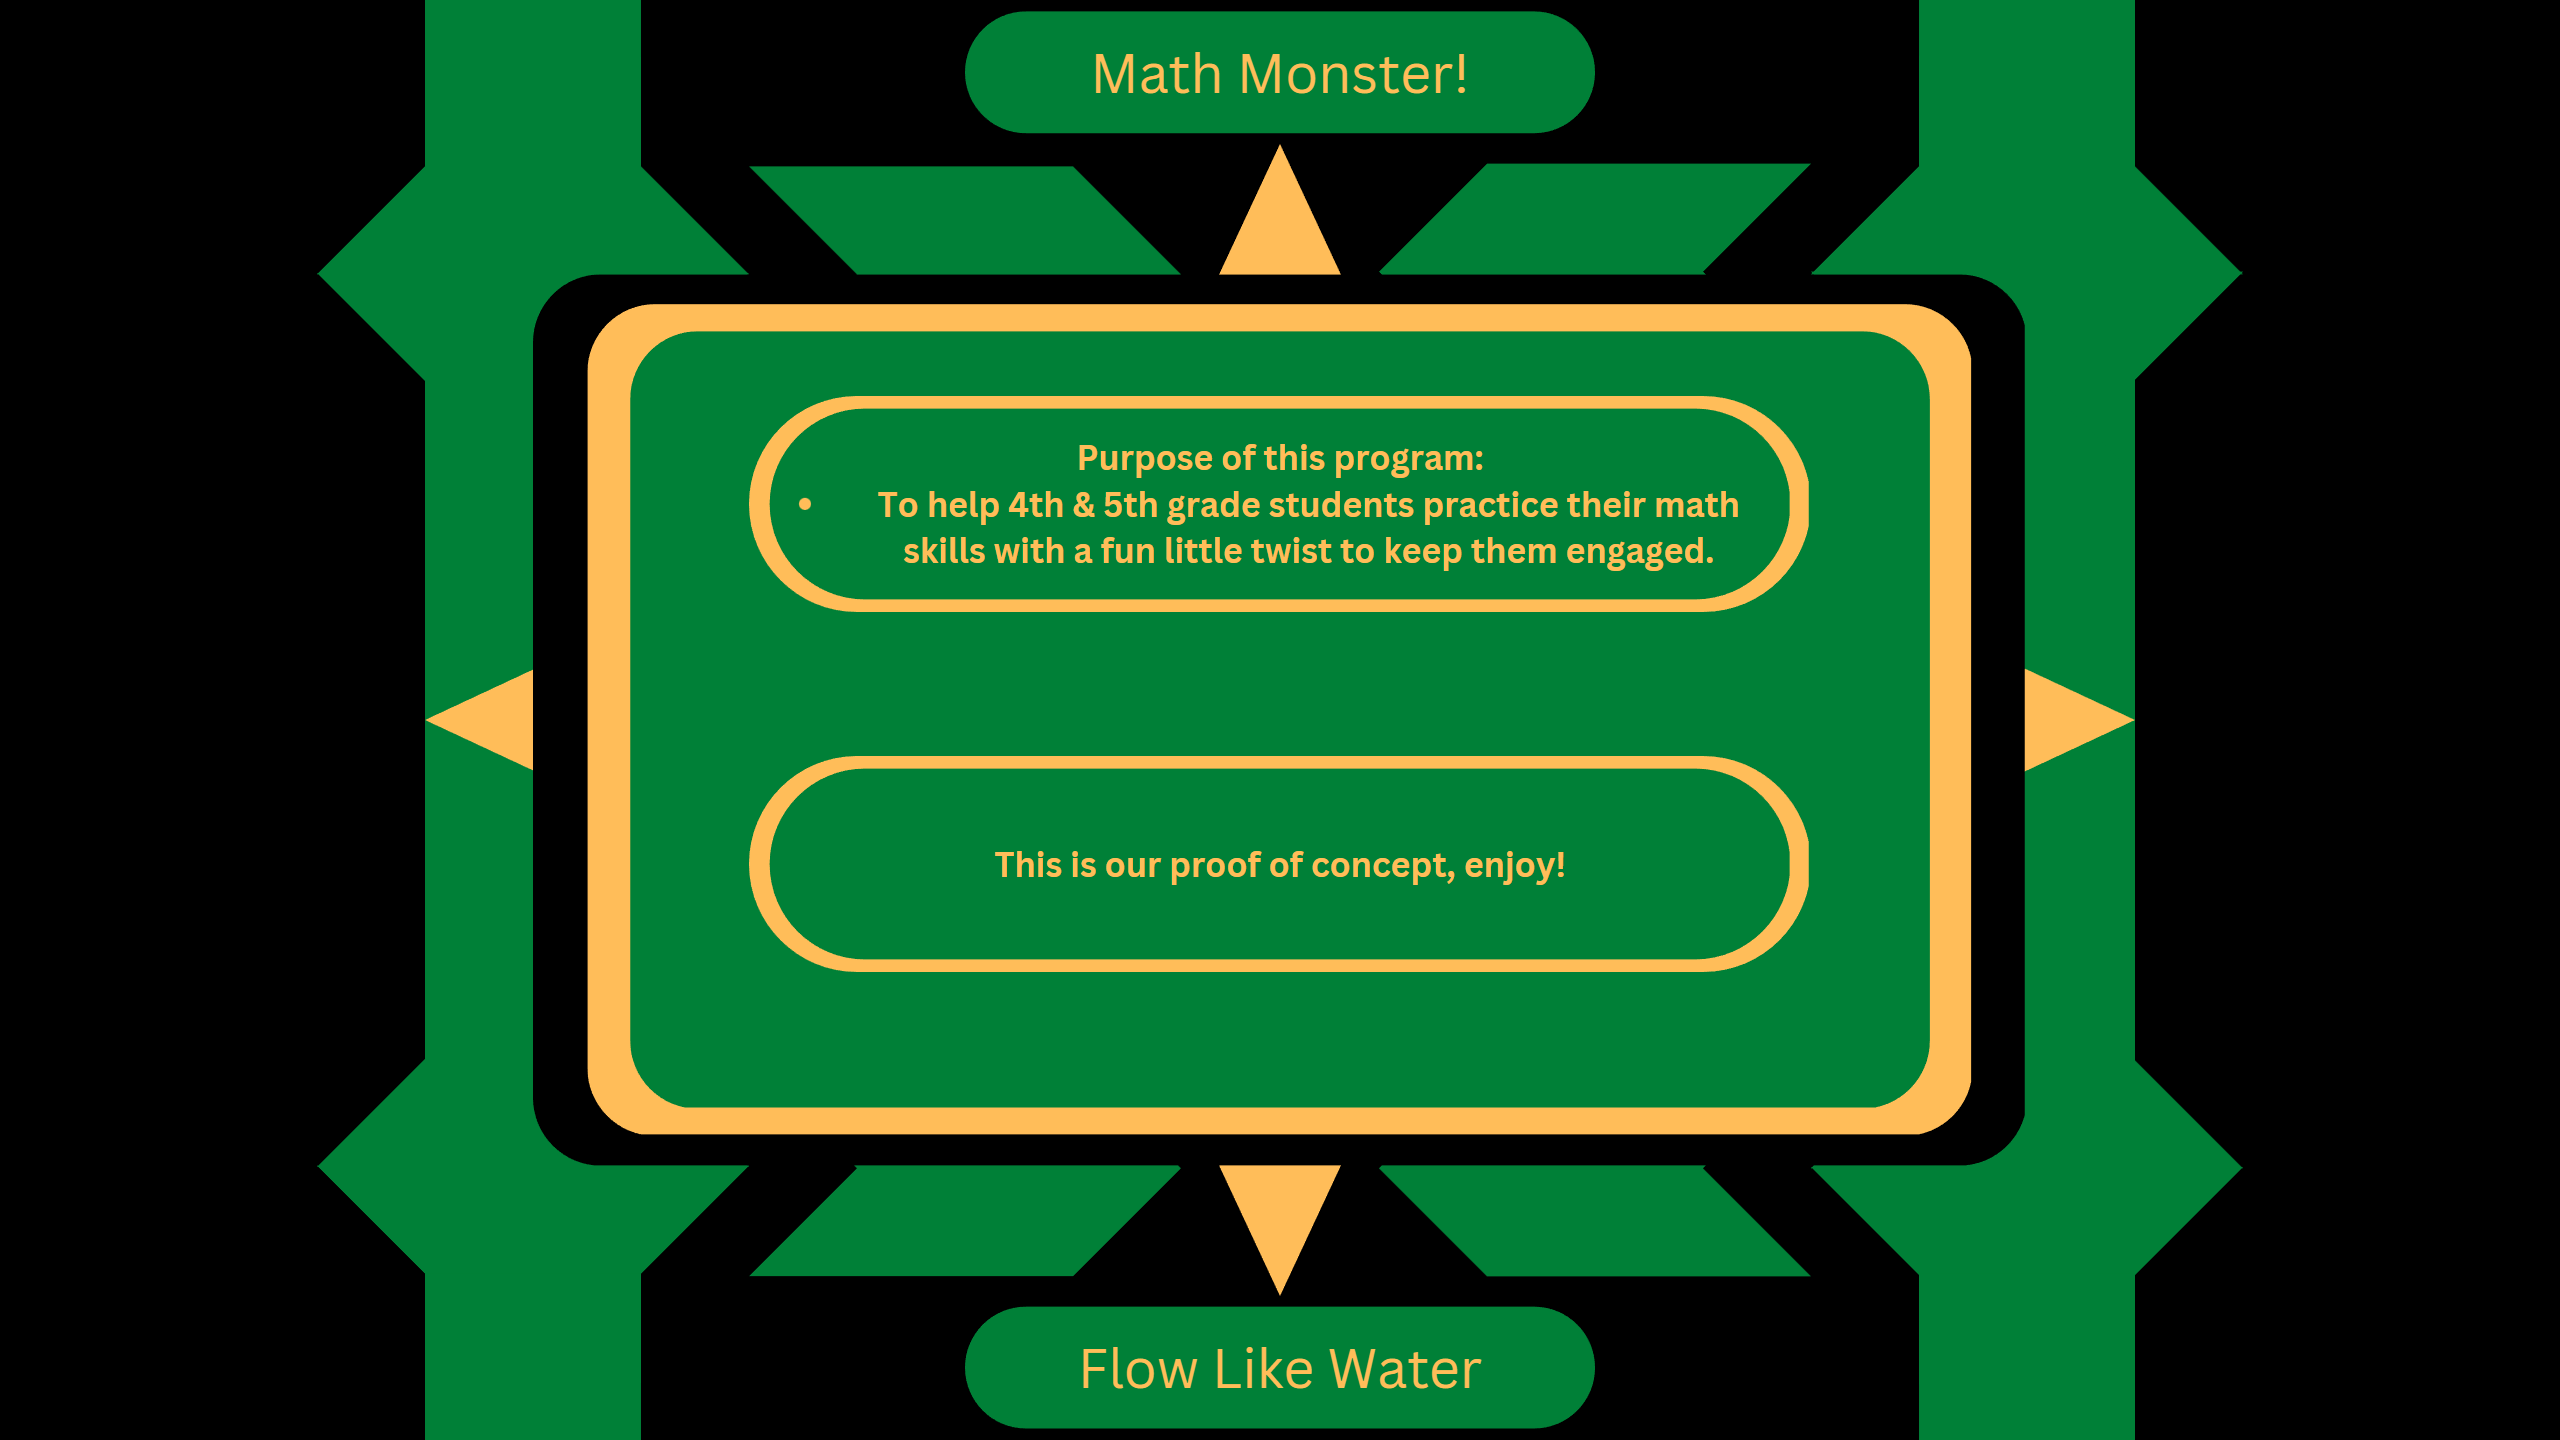 Math Monster! Text based game for helping 4th-5th grade students learn math.